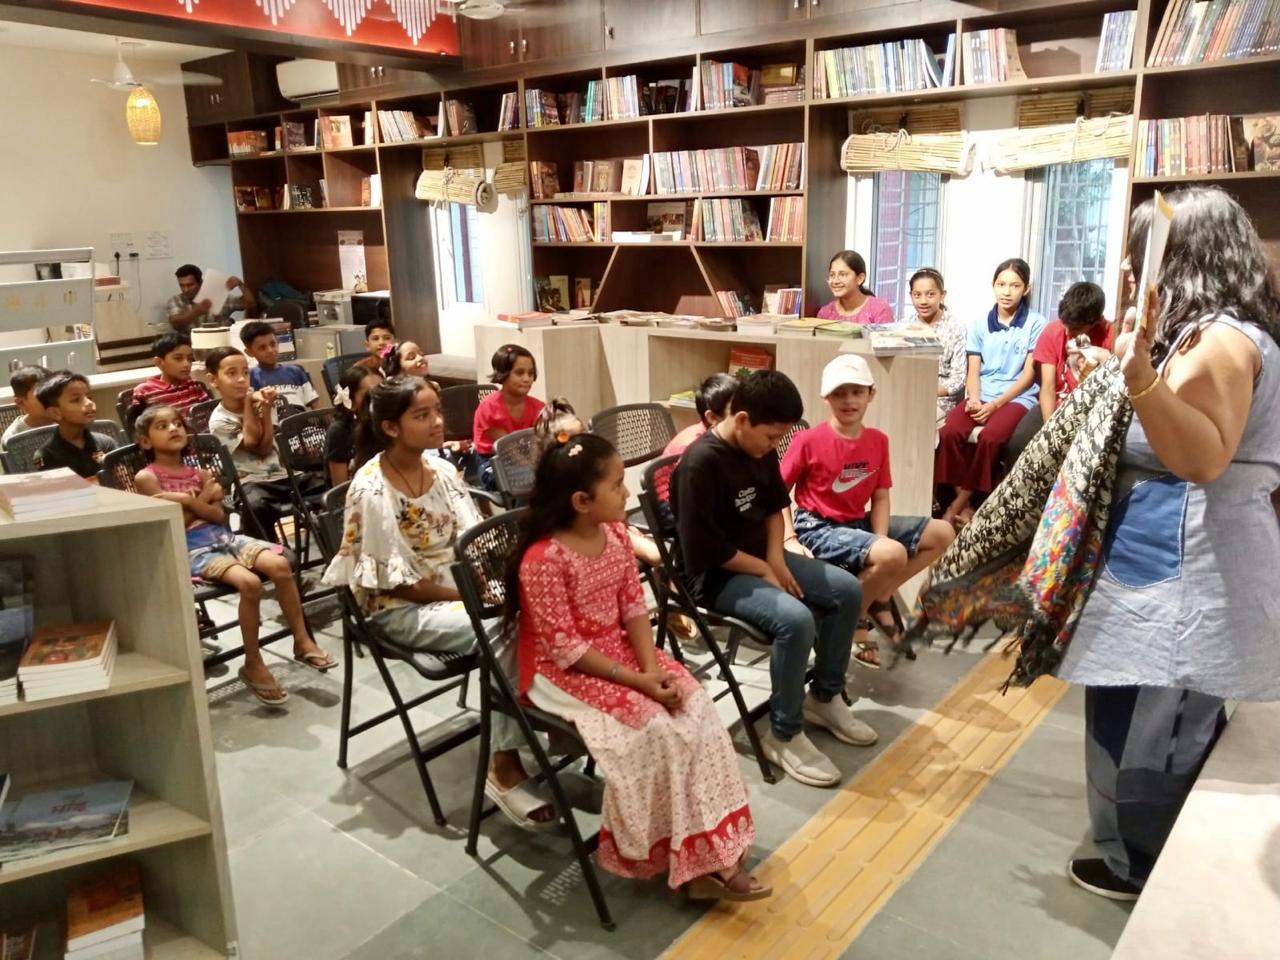 National Book Trust India celebrated National Reading Day across the country in remembrance of PN Panicker